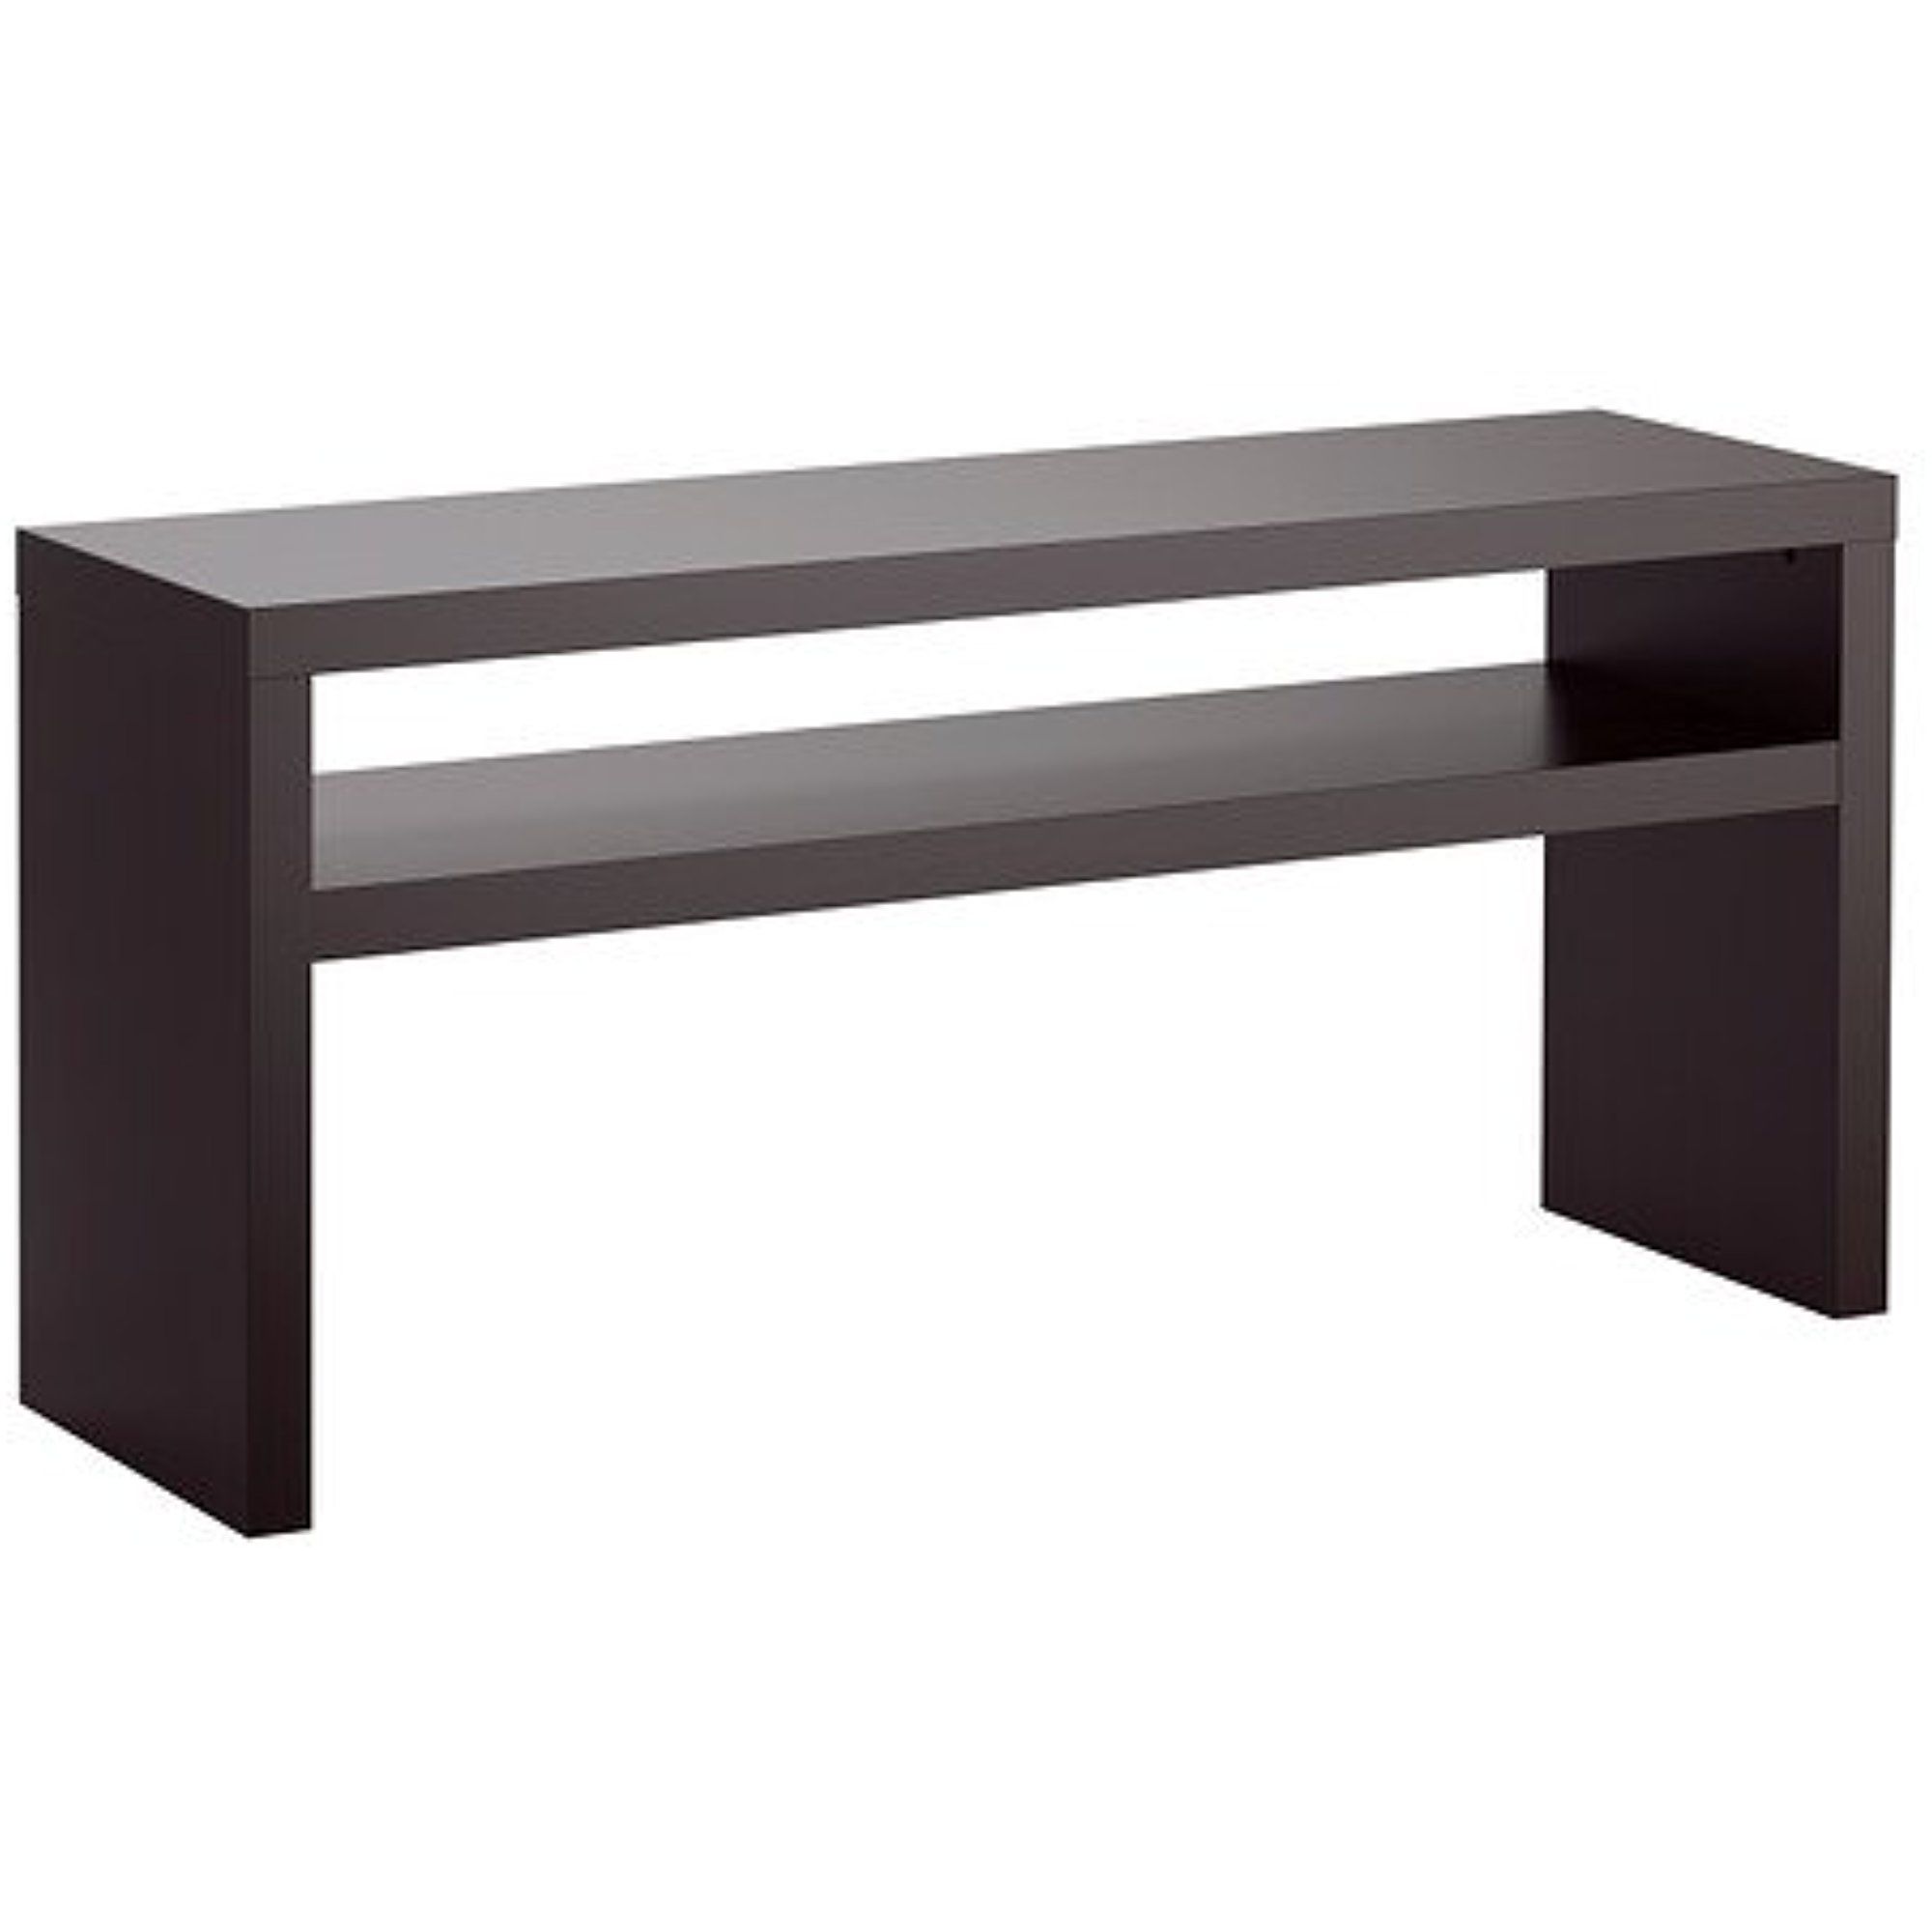 Ikea Console Table, Black Brown 55 1/8x15 3/8 ",  (View 6 of 10)